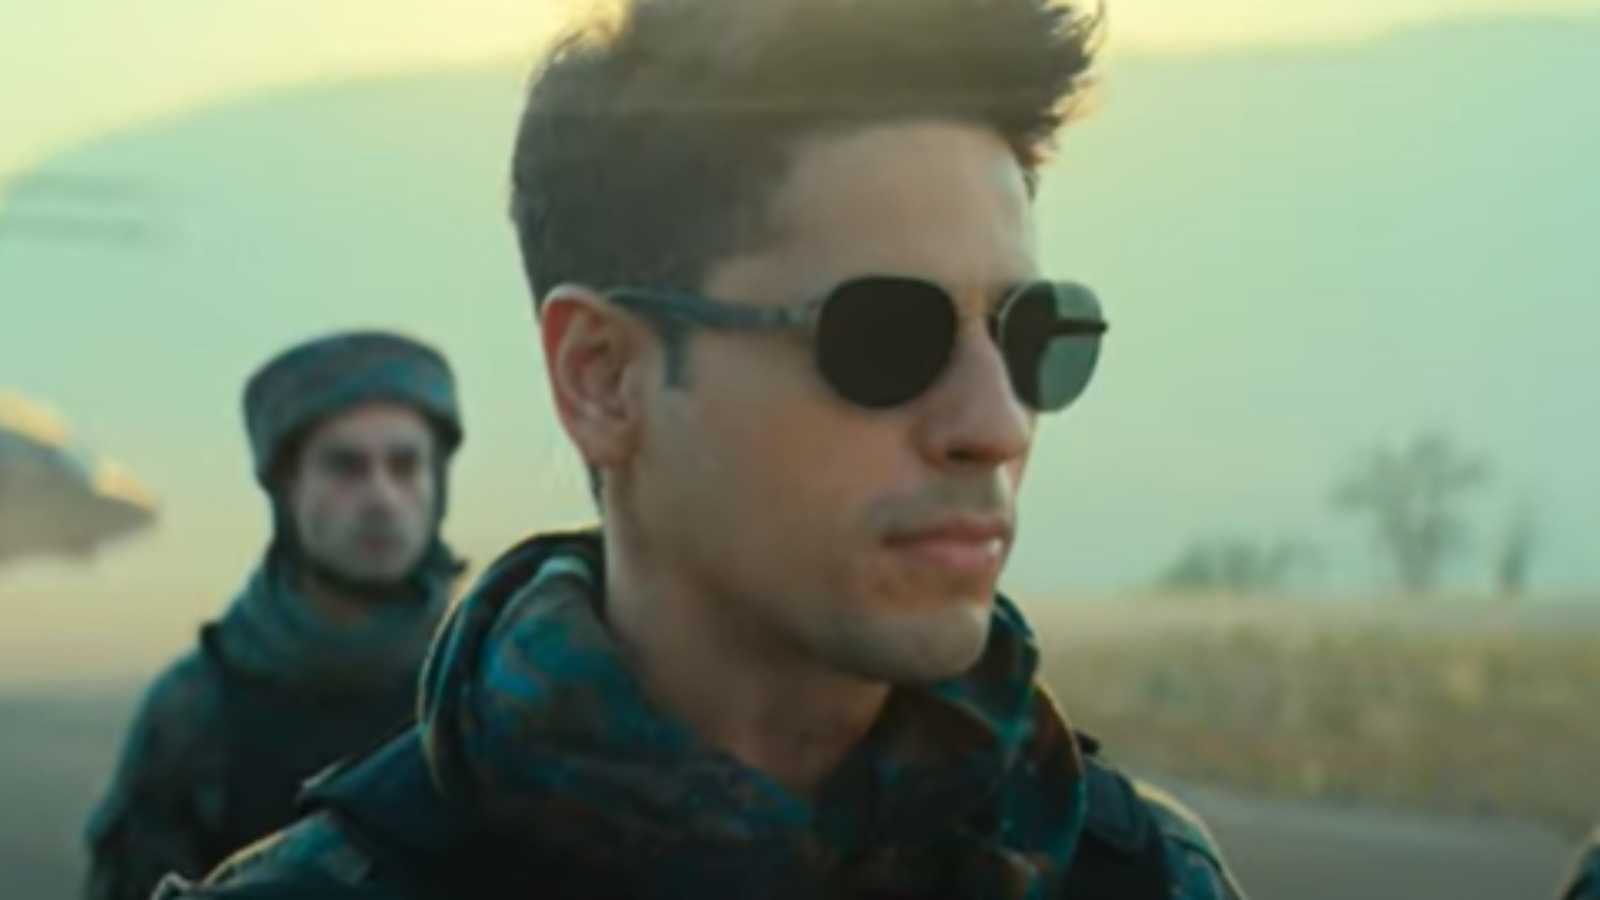 Yodha trailer: Sidharth Malhotra starrer is high on patriotism and some mid-air intense action sequences, watch